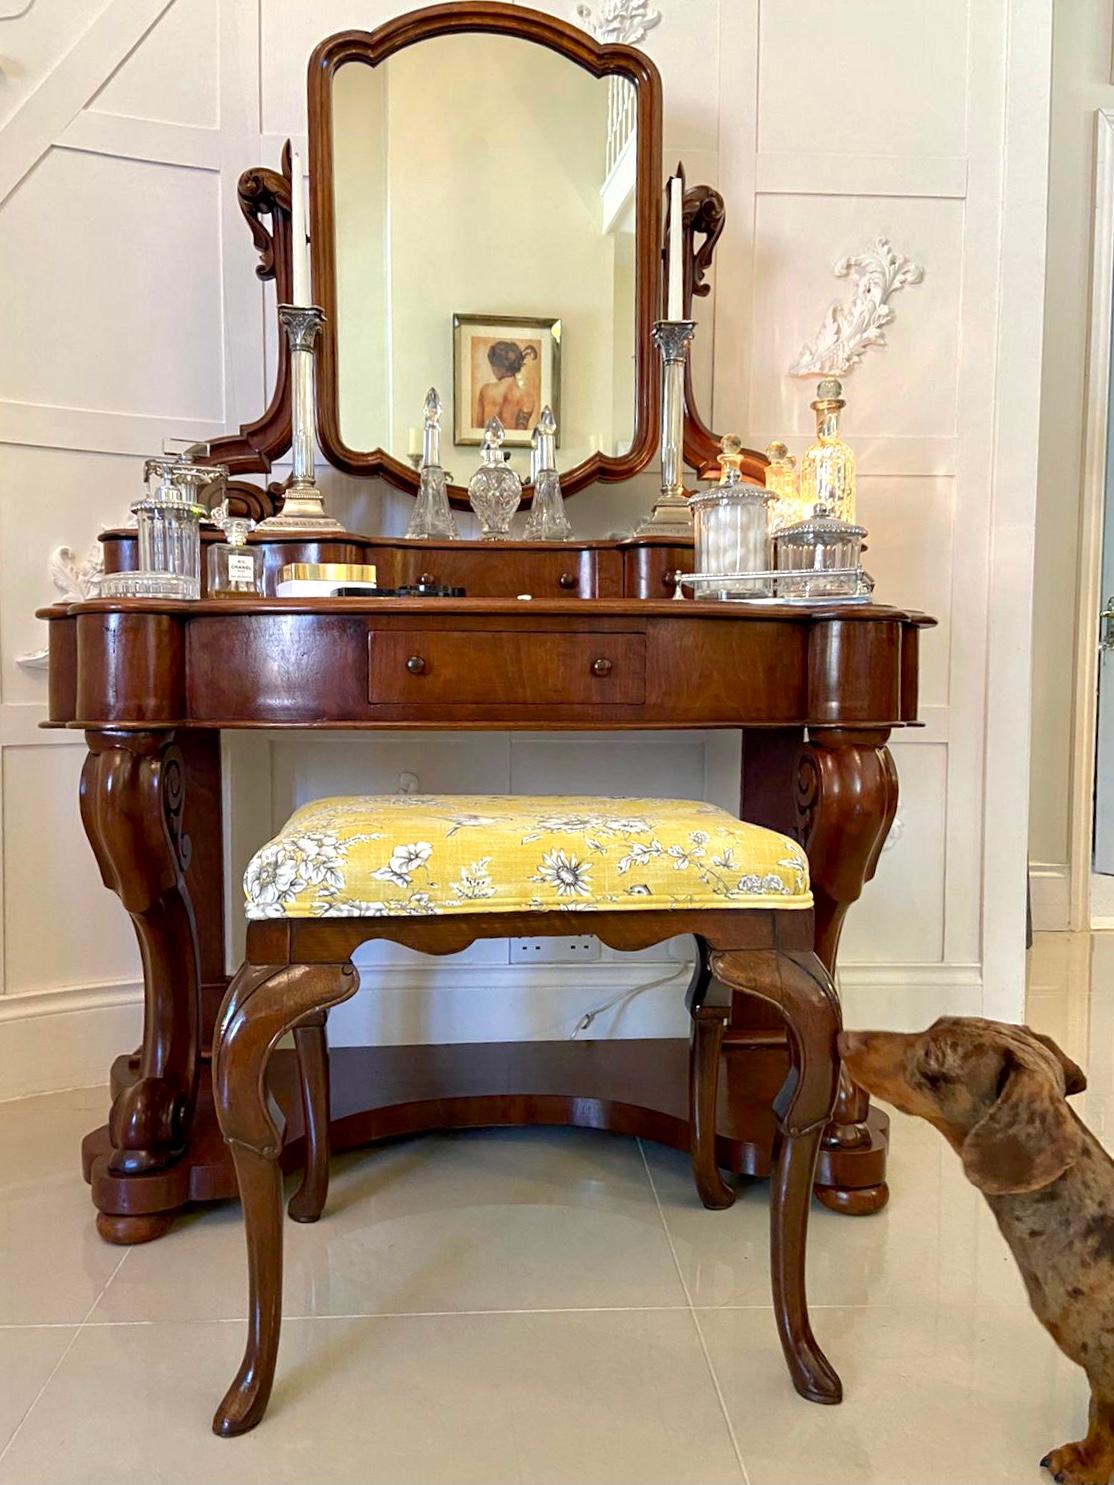 Antique Victorian walnut stool having a pretty newly upholstered seat in a quality fabric depicting finches and wild flowers. It is raised on superb solid walnut cabriole legs with a pad foot.

A very attractive example of desirable colour in